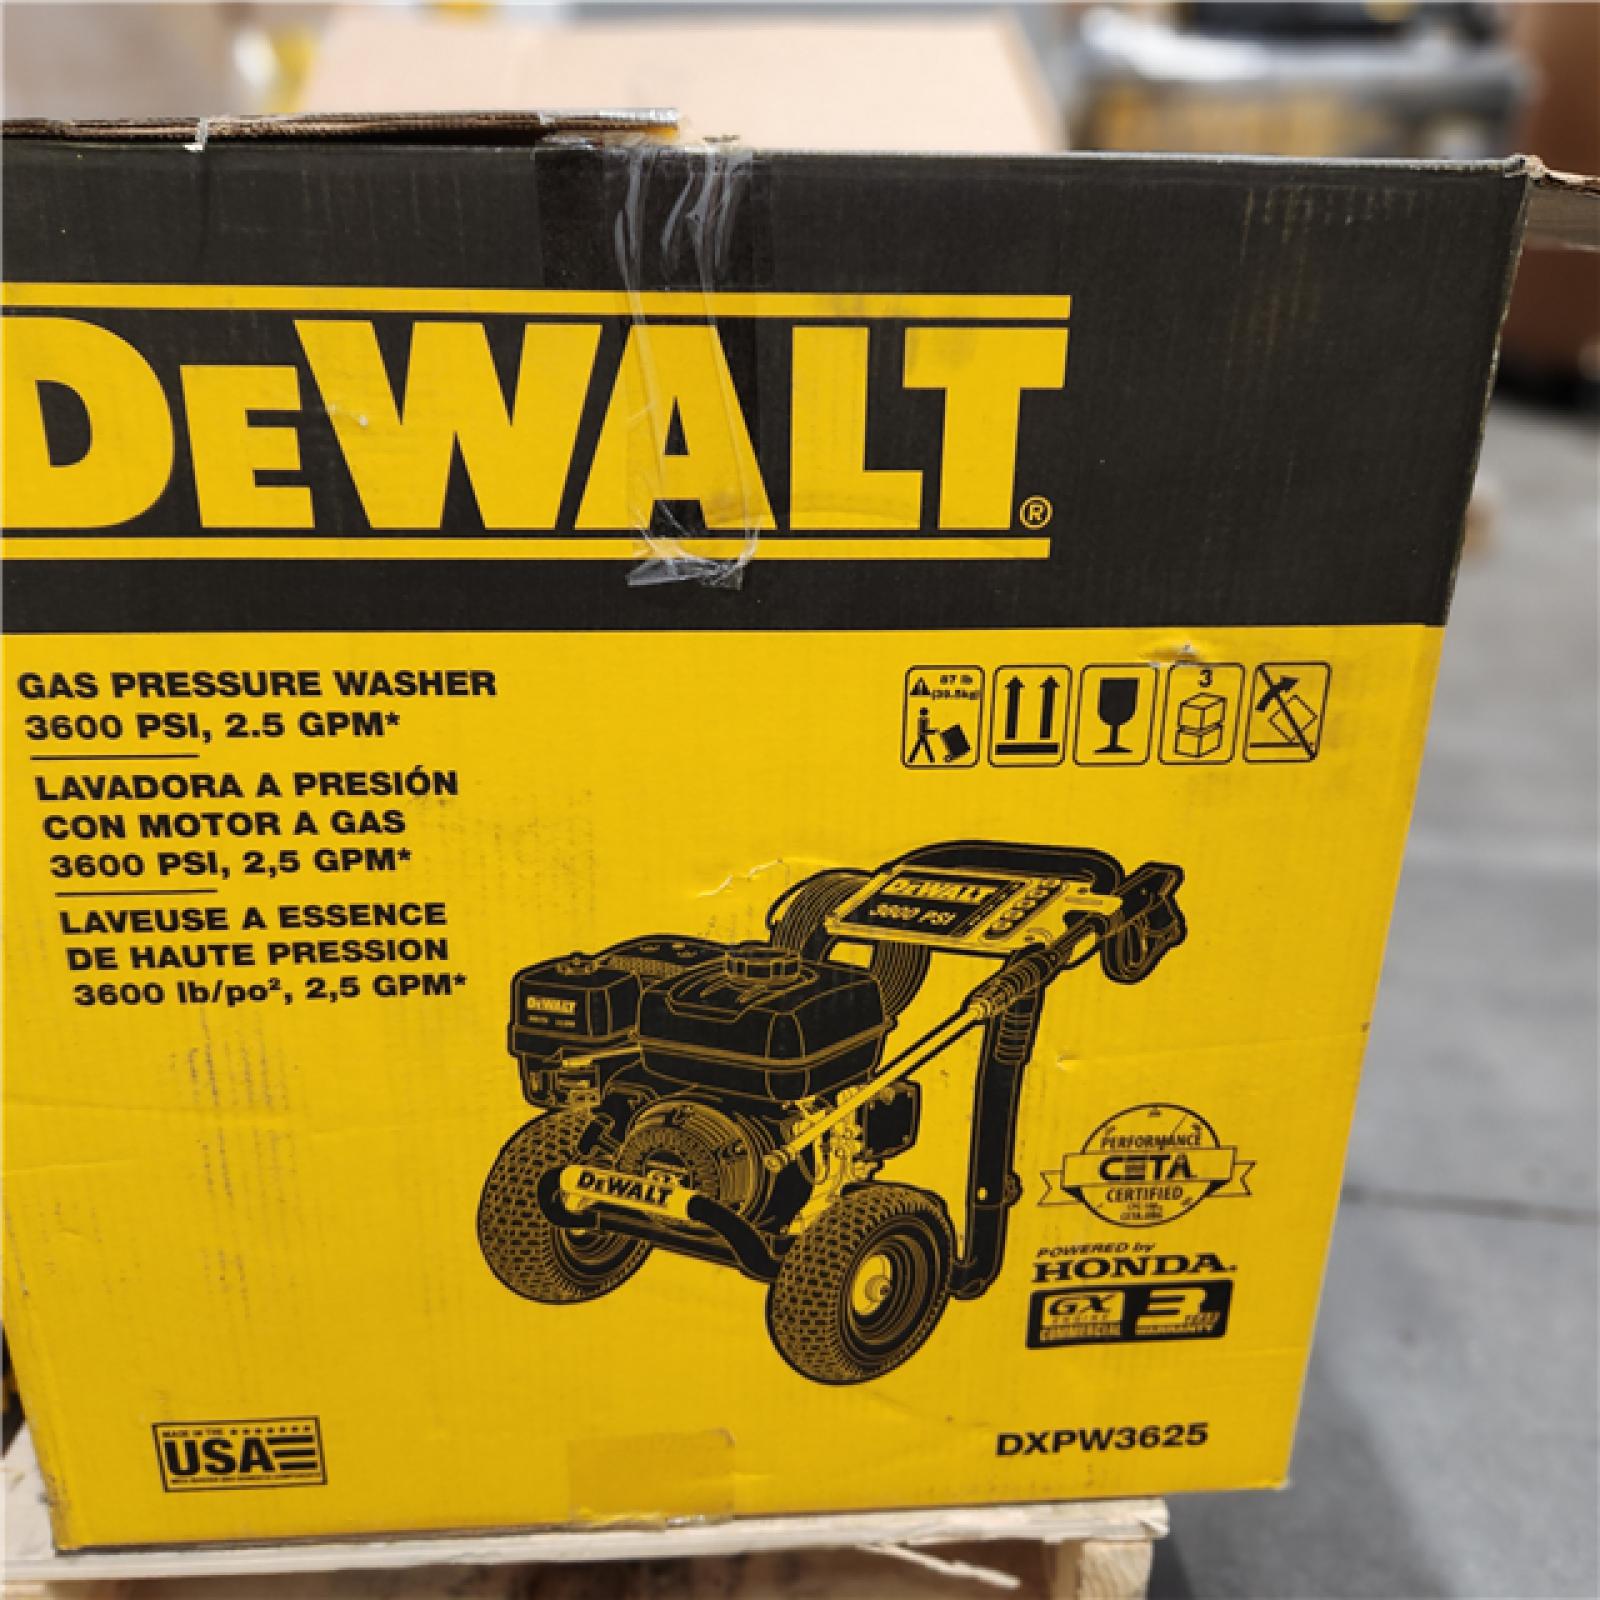 Dallas Location - As-Is DEWALT 3600 PSI 2.5 GPM Gas Pressure Washer -Appears Good Condition